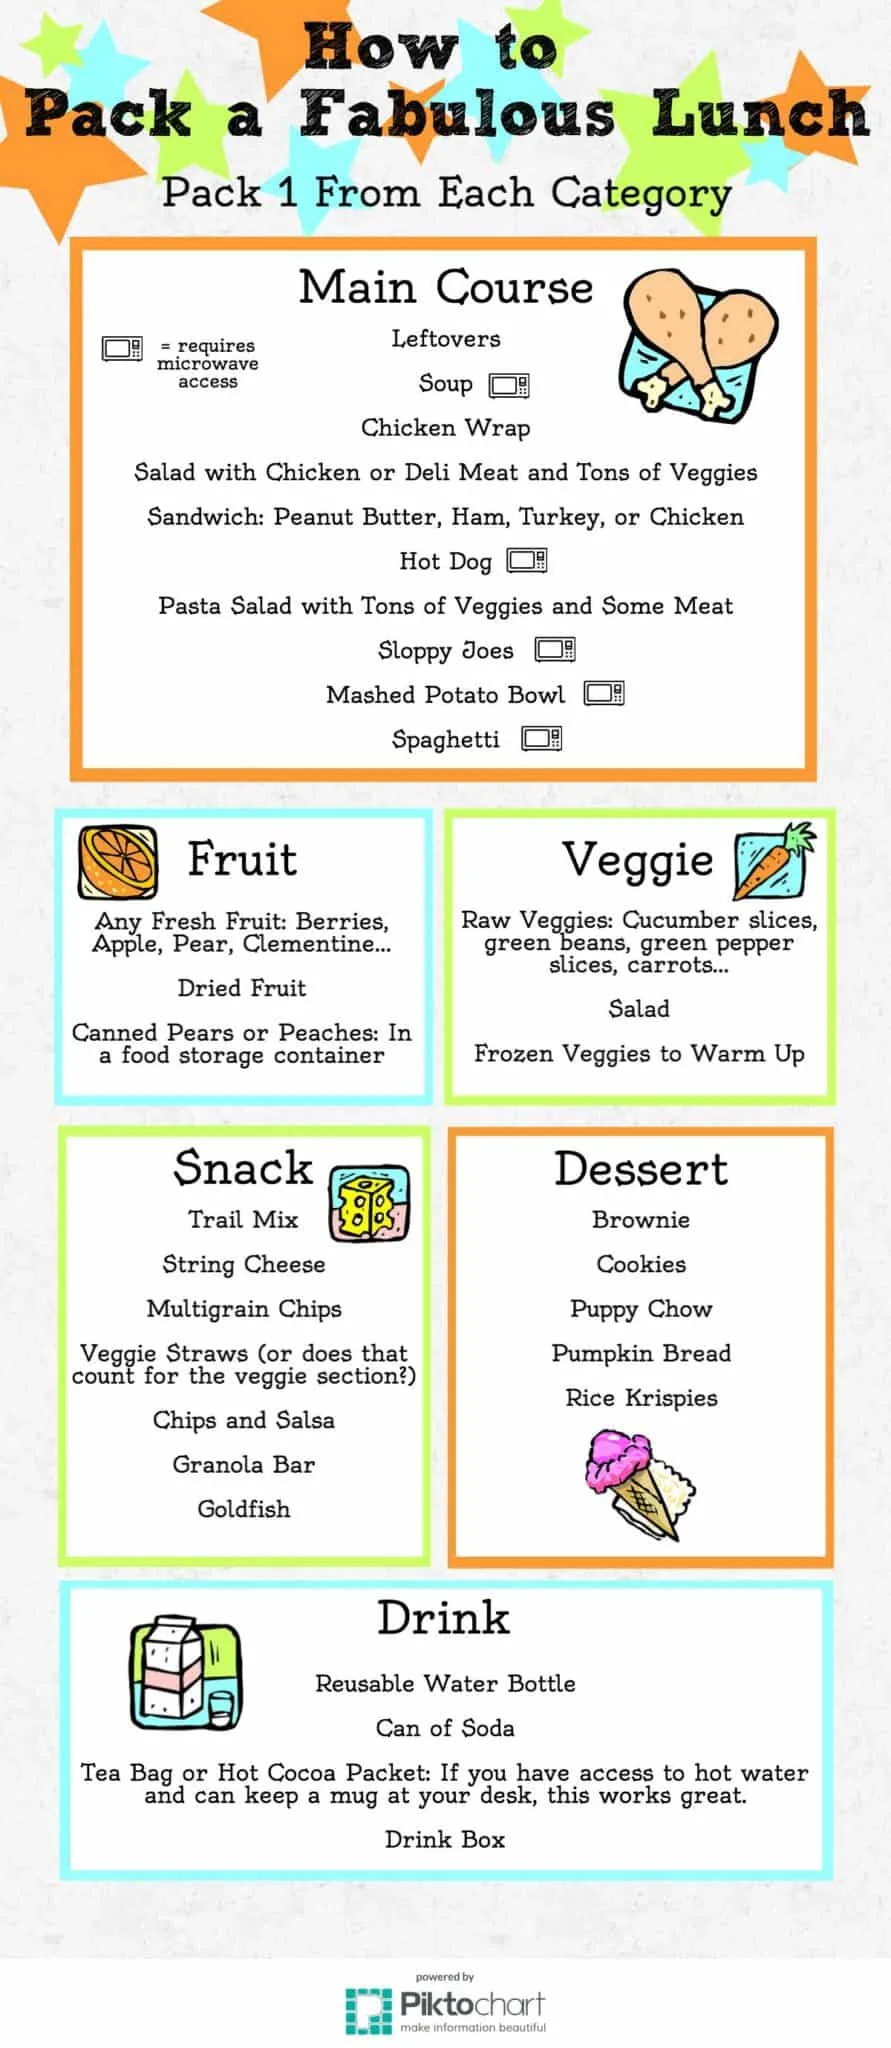 How to Pack a Fabulous Lunch: Sack lunch ideas. Great list of what to pack in a lunch. Healthy, balanced lunch. Pin now, save to look at for ideas later. 